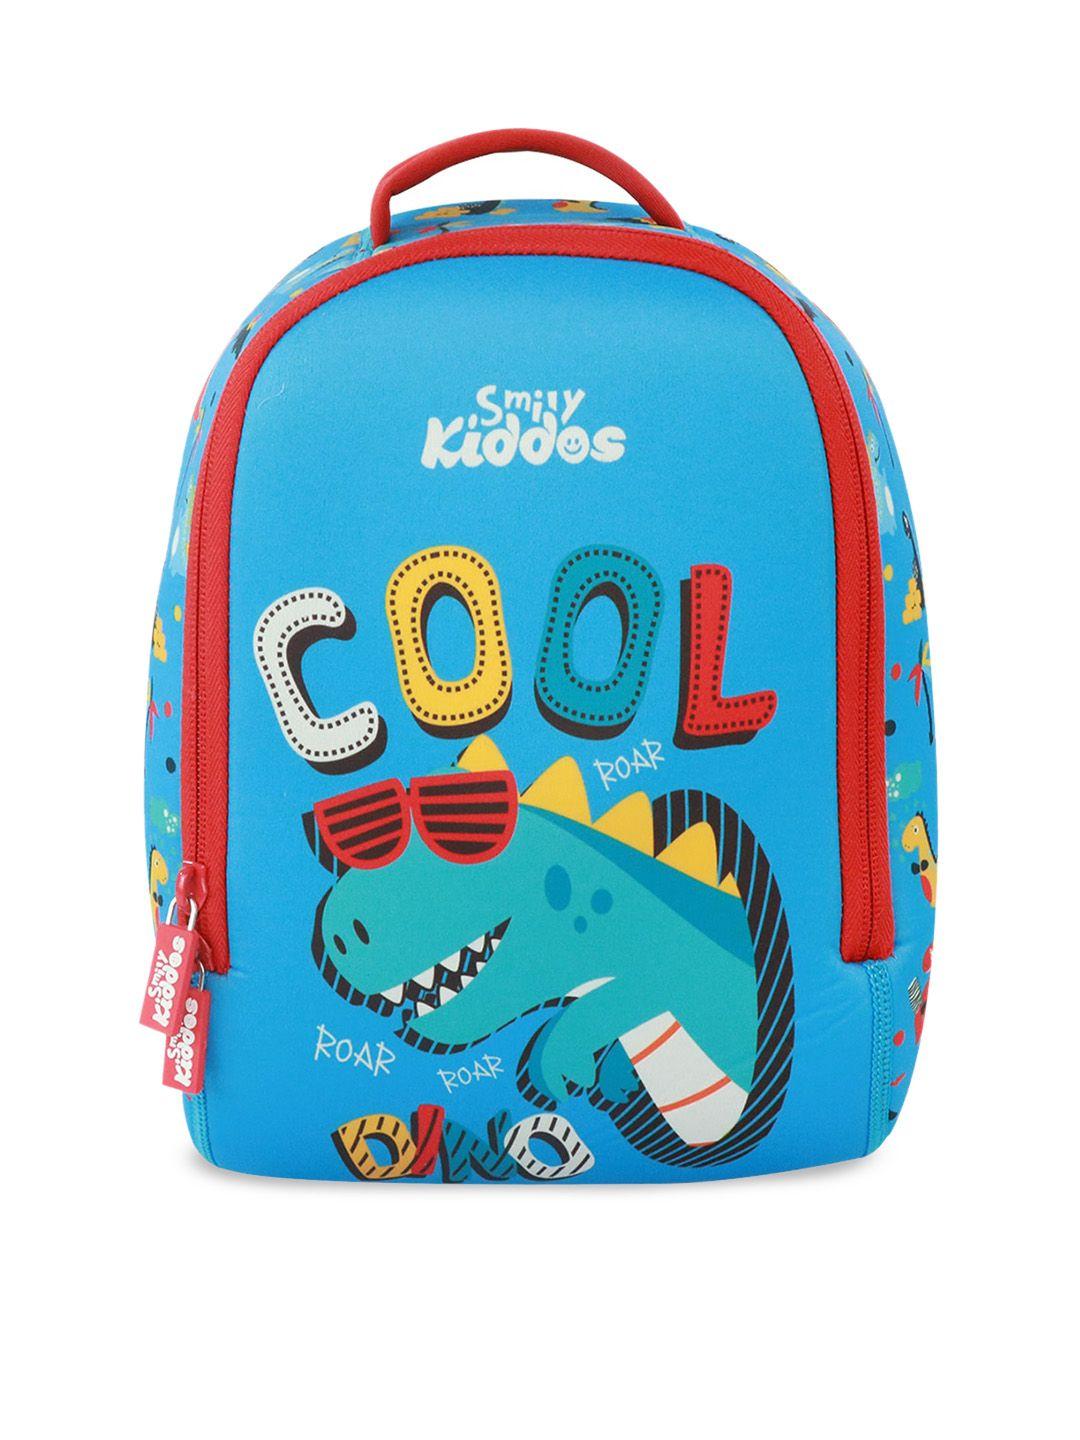 smily kiddos unisex kids blue & red graphic backpack